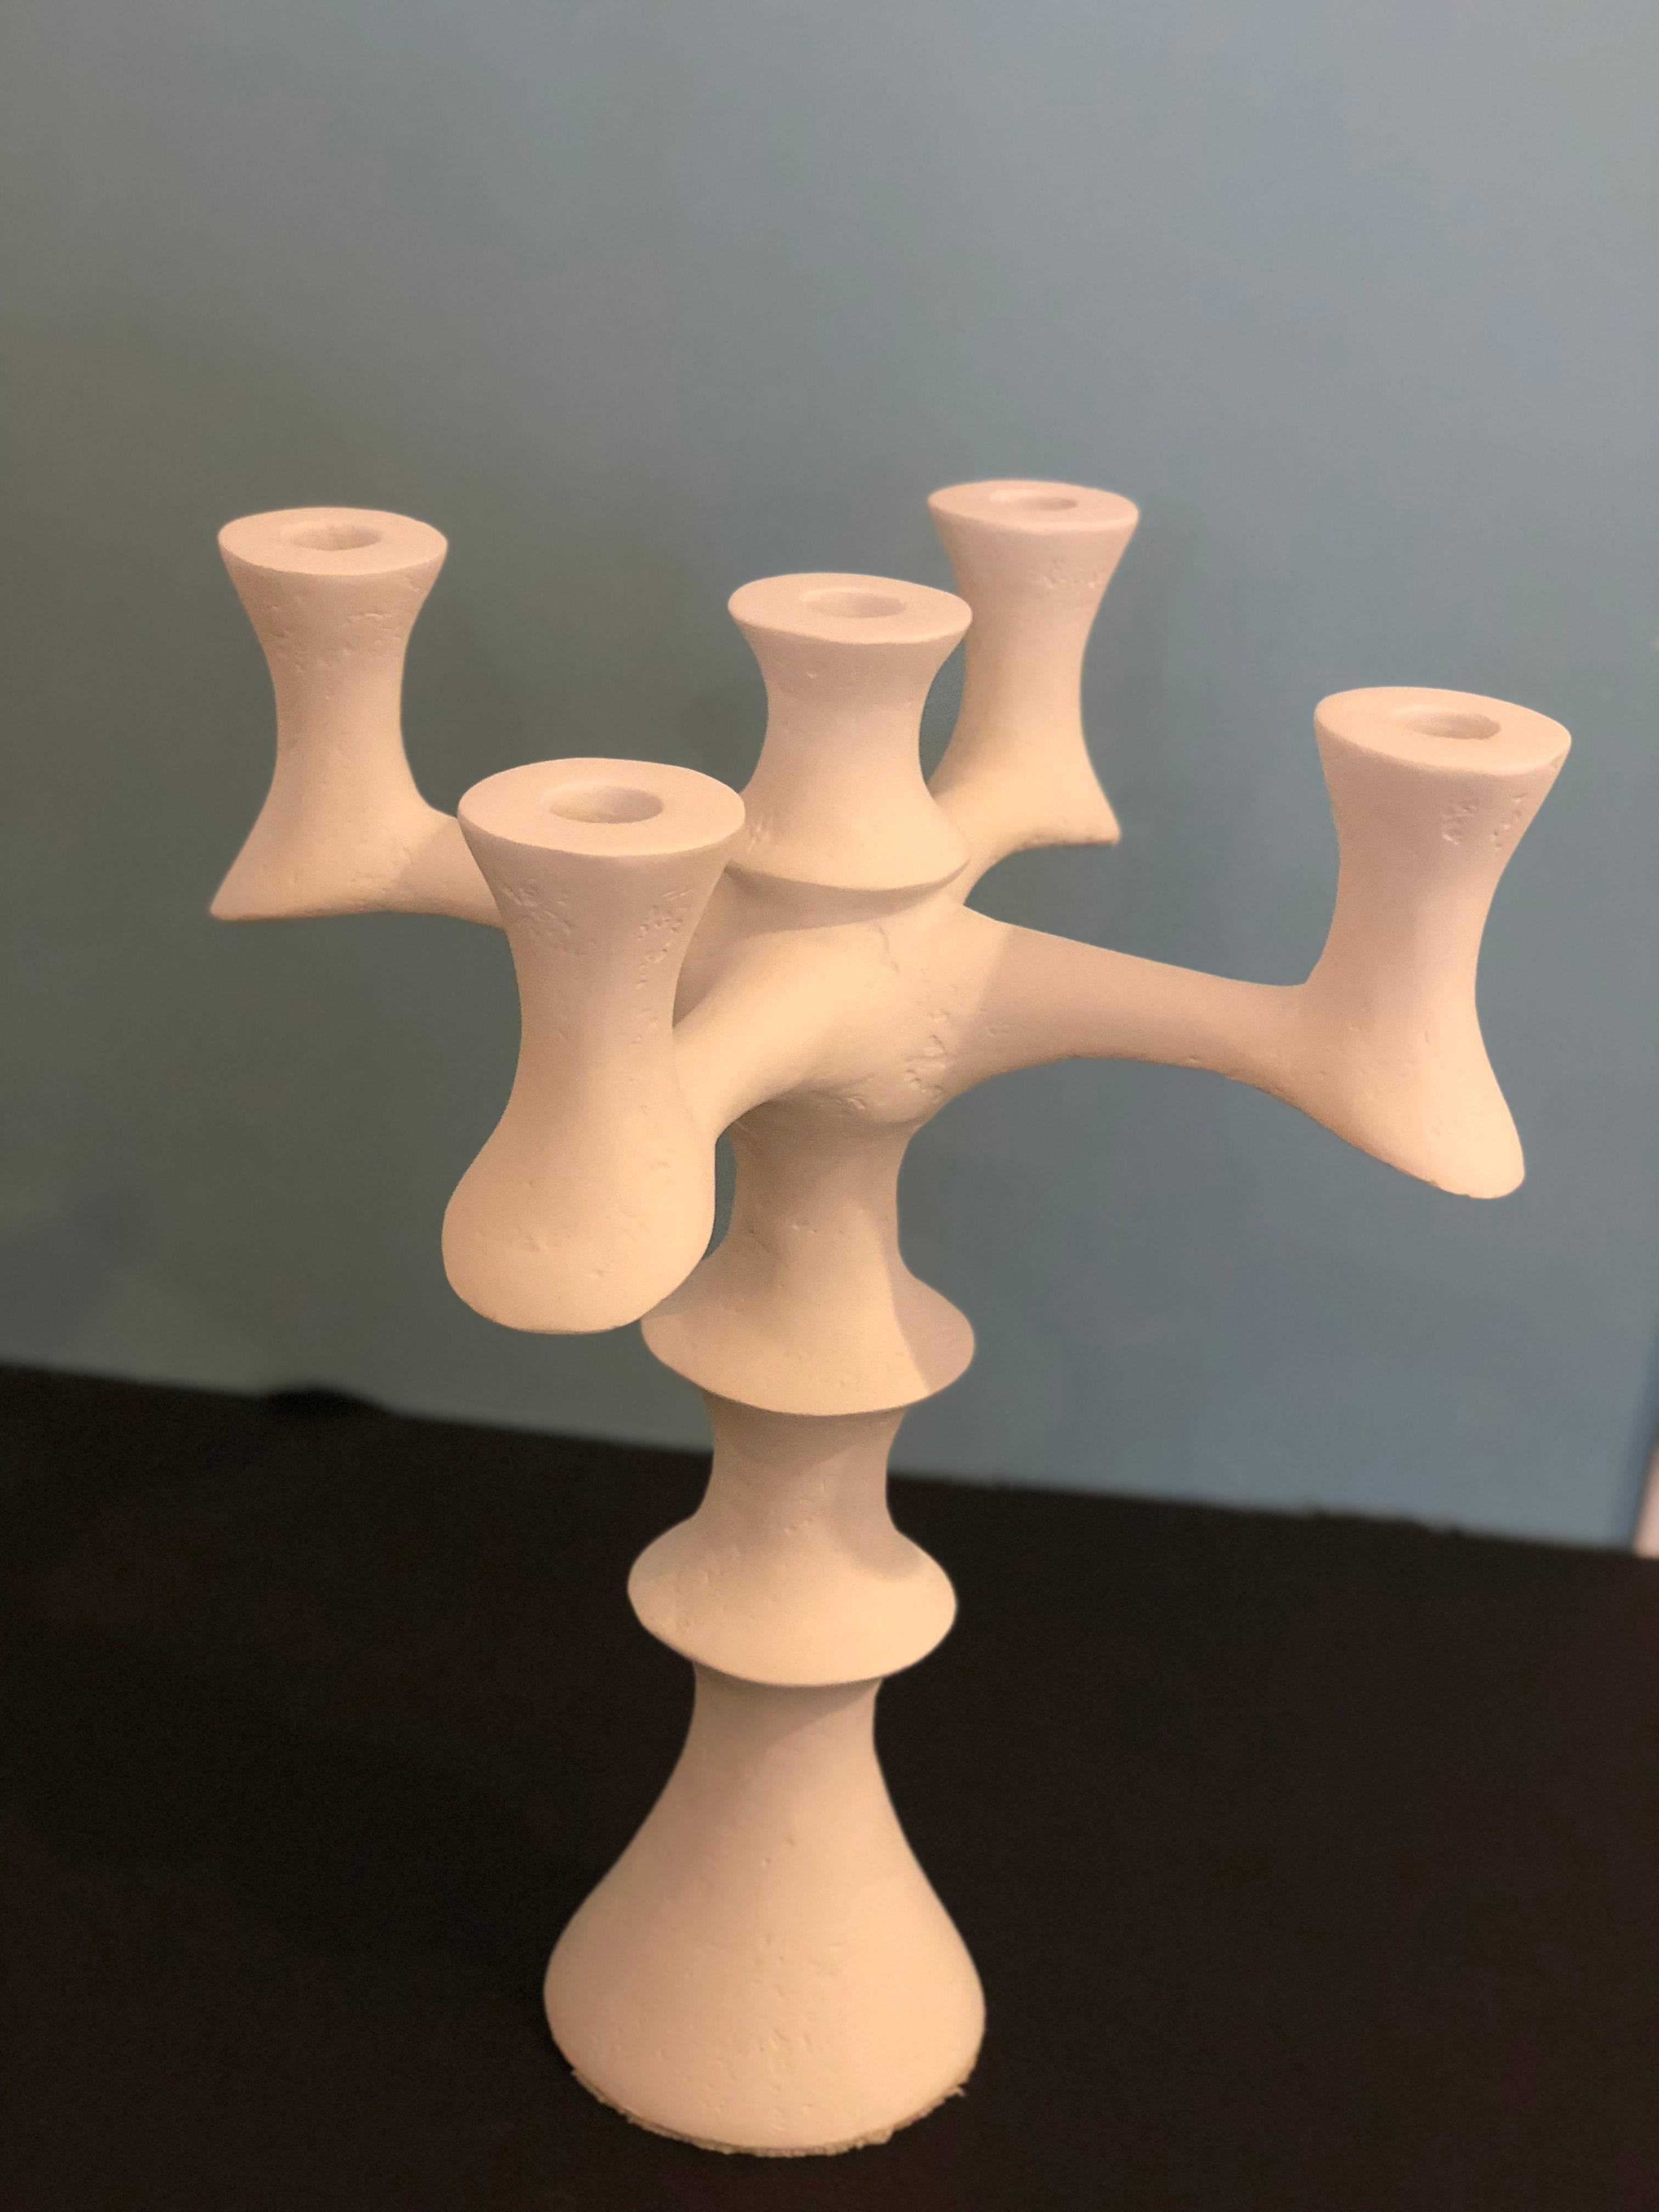 Sculpted plaster of Paris candleholder. A reminiscent of Giacometti's work, this five candleholder has a sleek yet elegant design. With its soft edges and texture it makes for an outstanding centre piece for any console or table.